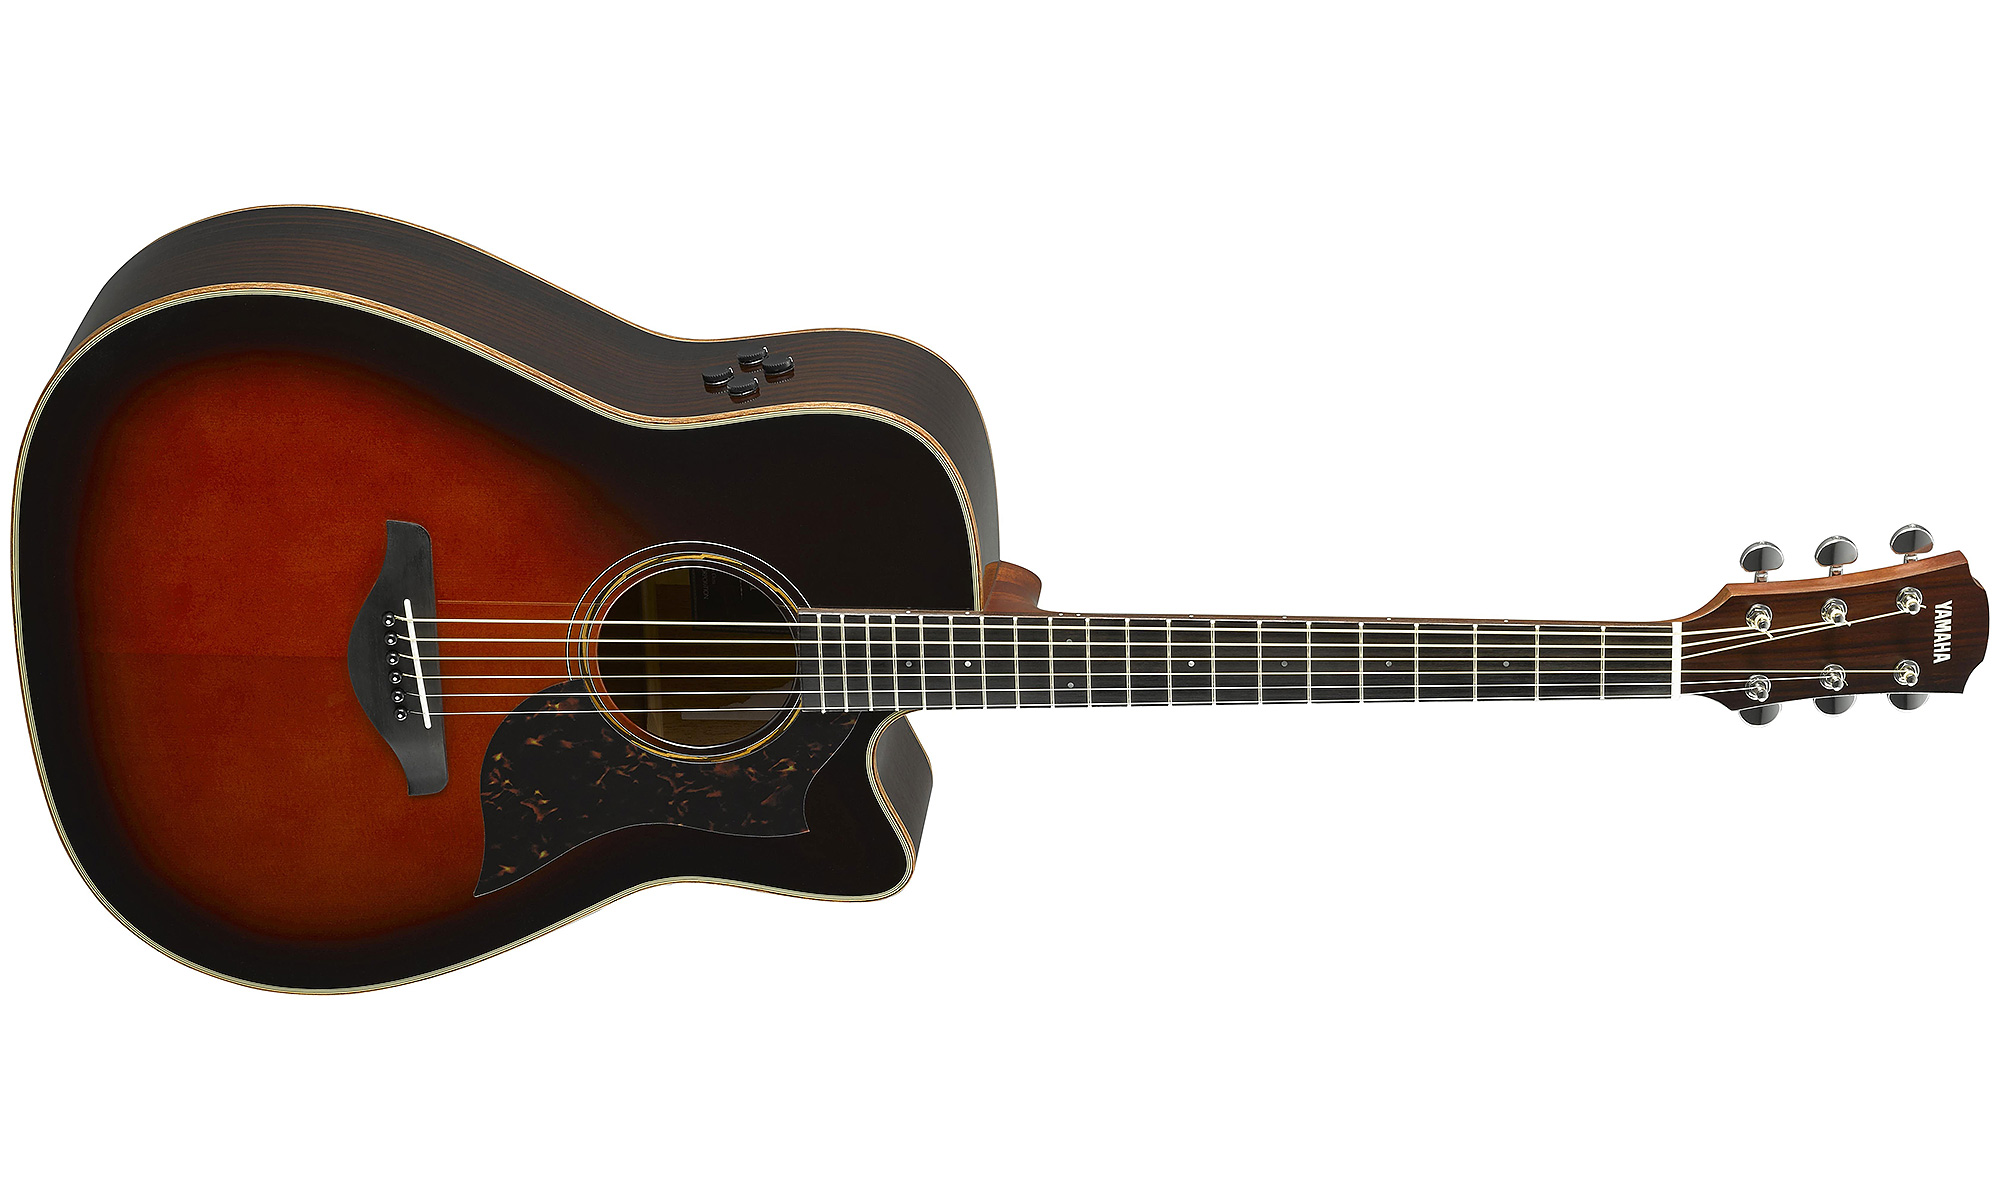 Yamaha A3r Are Tbs Dreadnought Cw Epicea Palissandre 2017 - Tobacco Brown Sunburst - Electro acoustic guitar - Variation 1